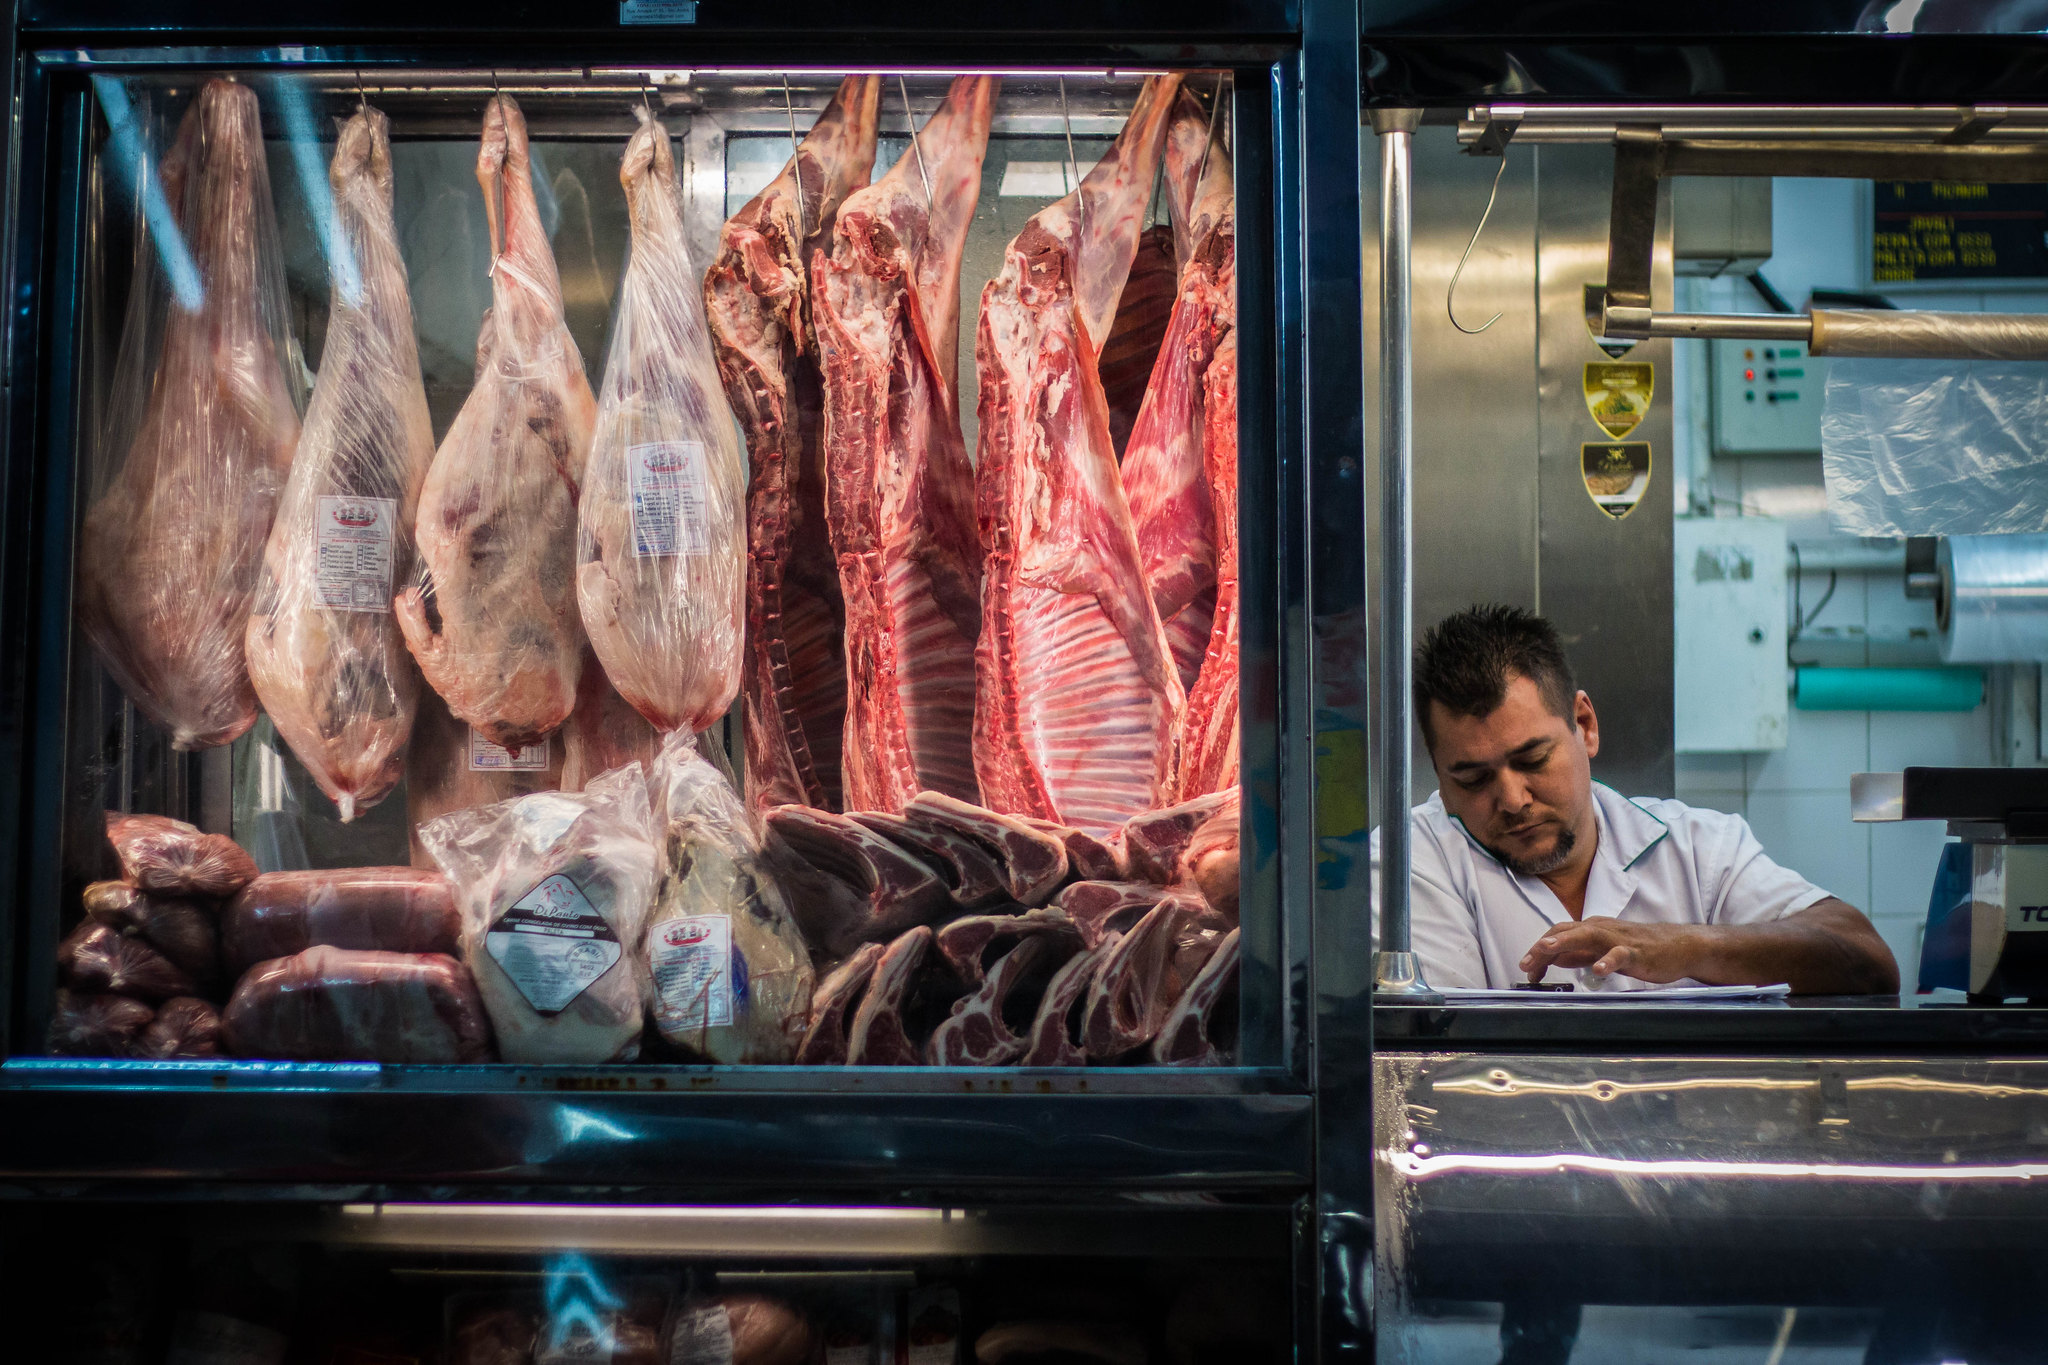 Should we all eat less meat?